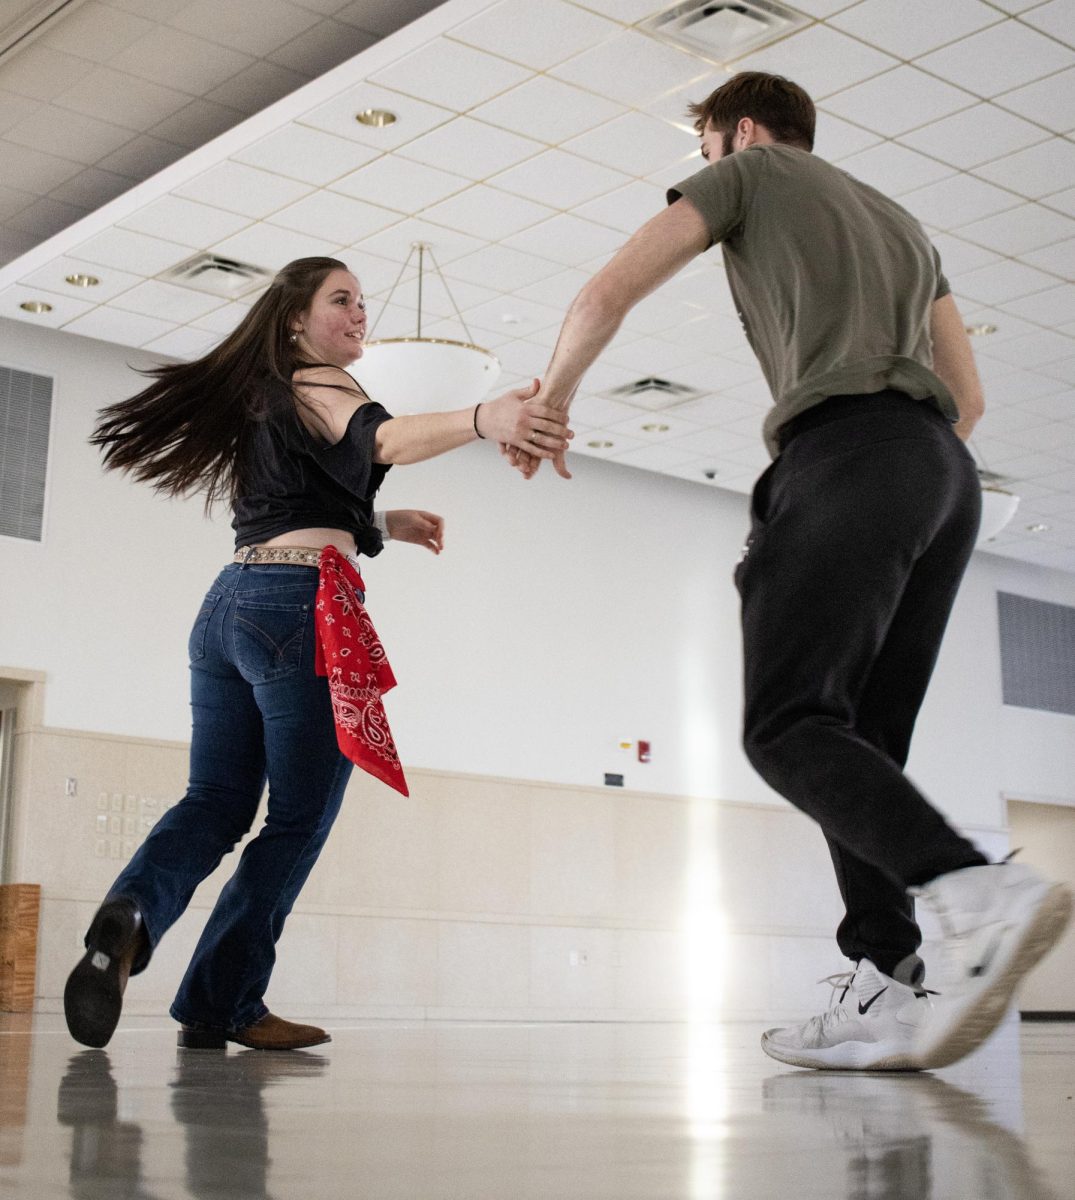 From left, Faith Hartke and Gabriel McElroy practice dancing together to music before the Panther Ho-Down event hosted by the Underground Line Dancing club starts on Saturday afternoon in the University Ballroom.